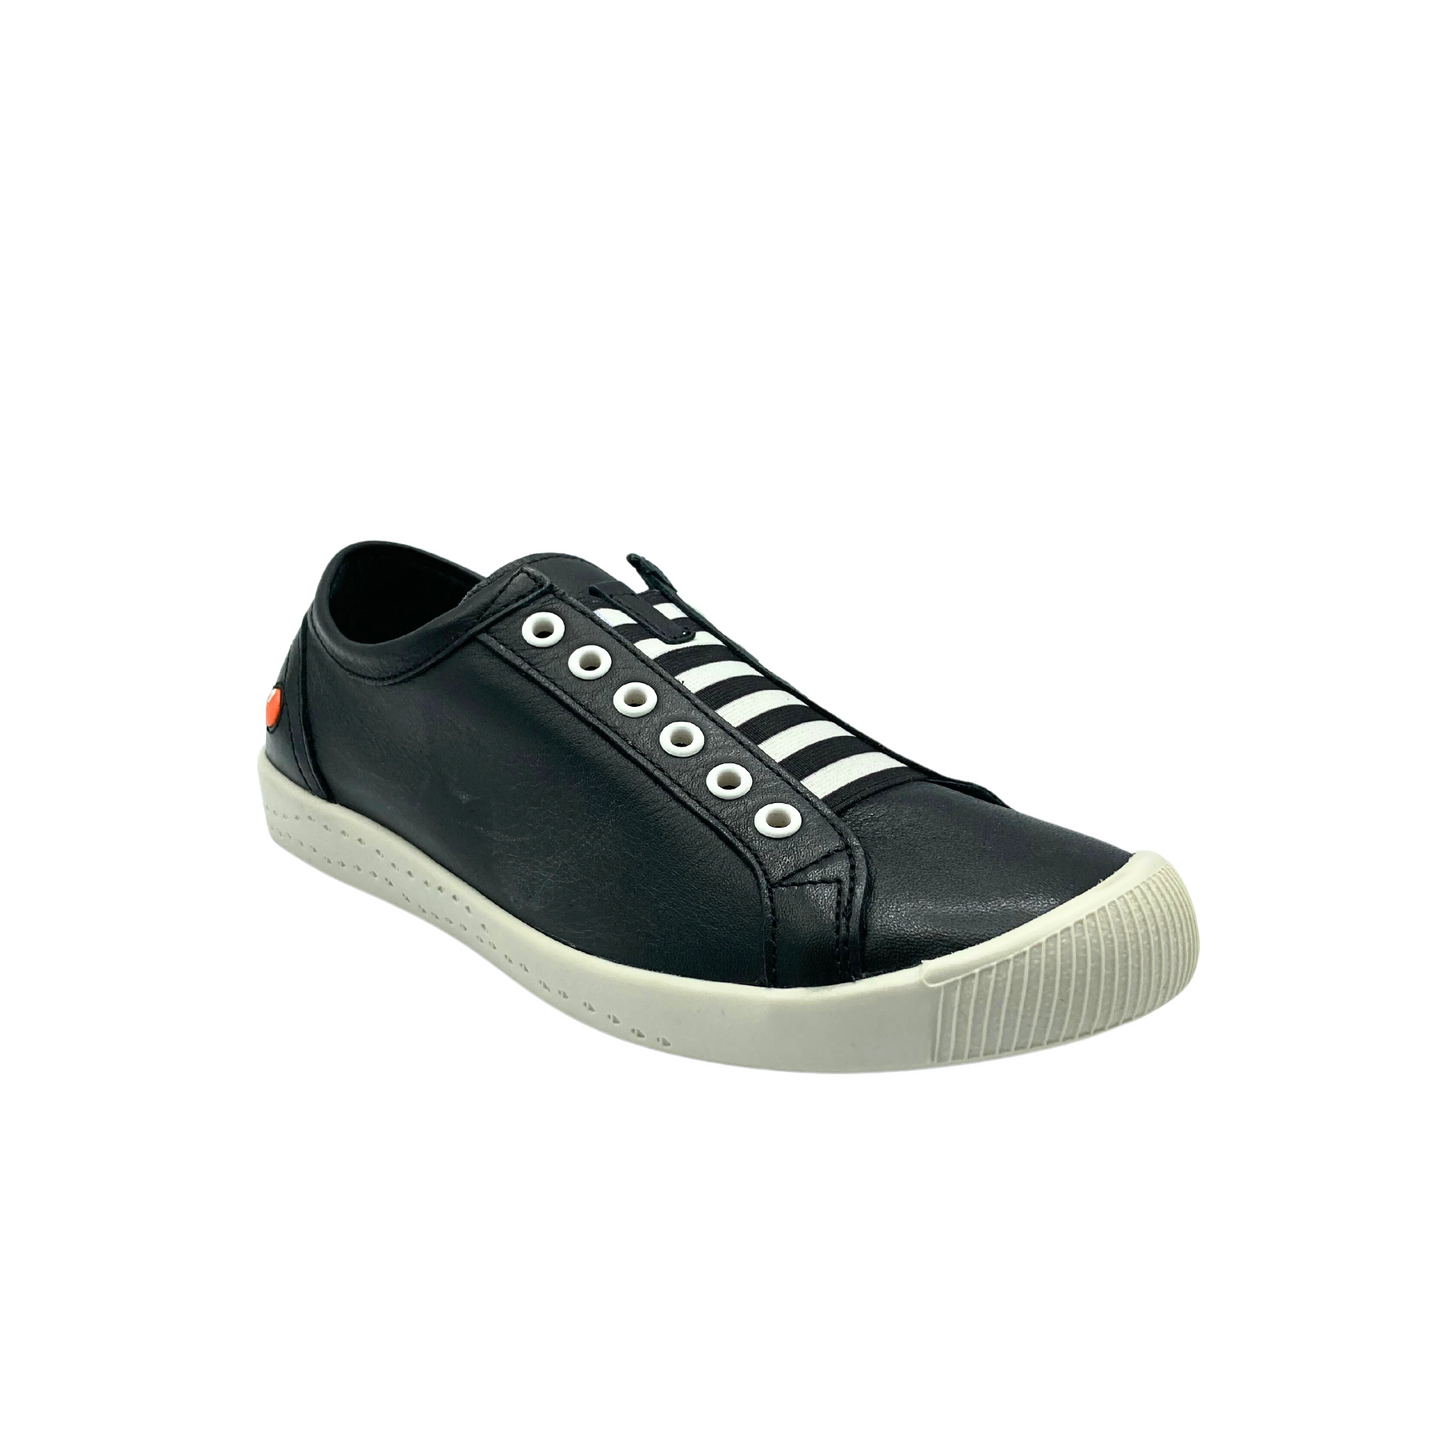 Angled side view of a black leather sneaker.  Slip on style with white elastic laces and white grommets.